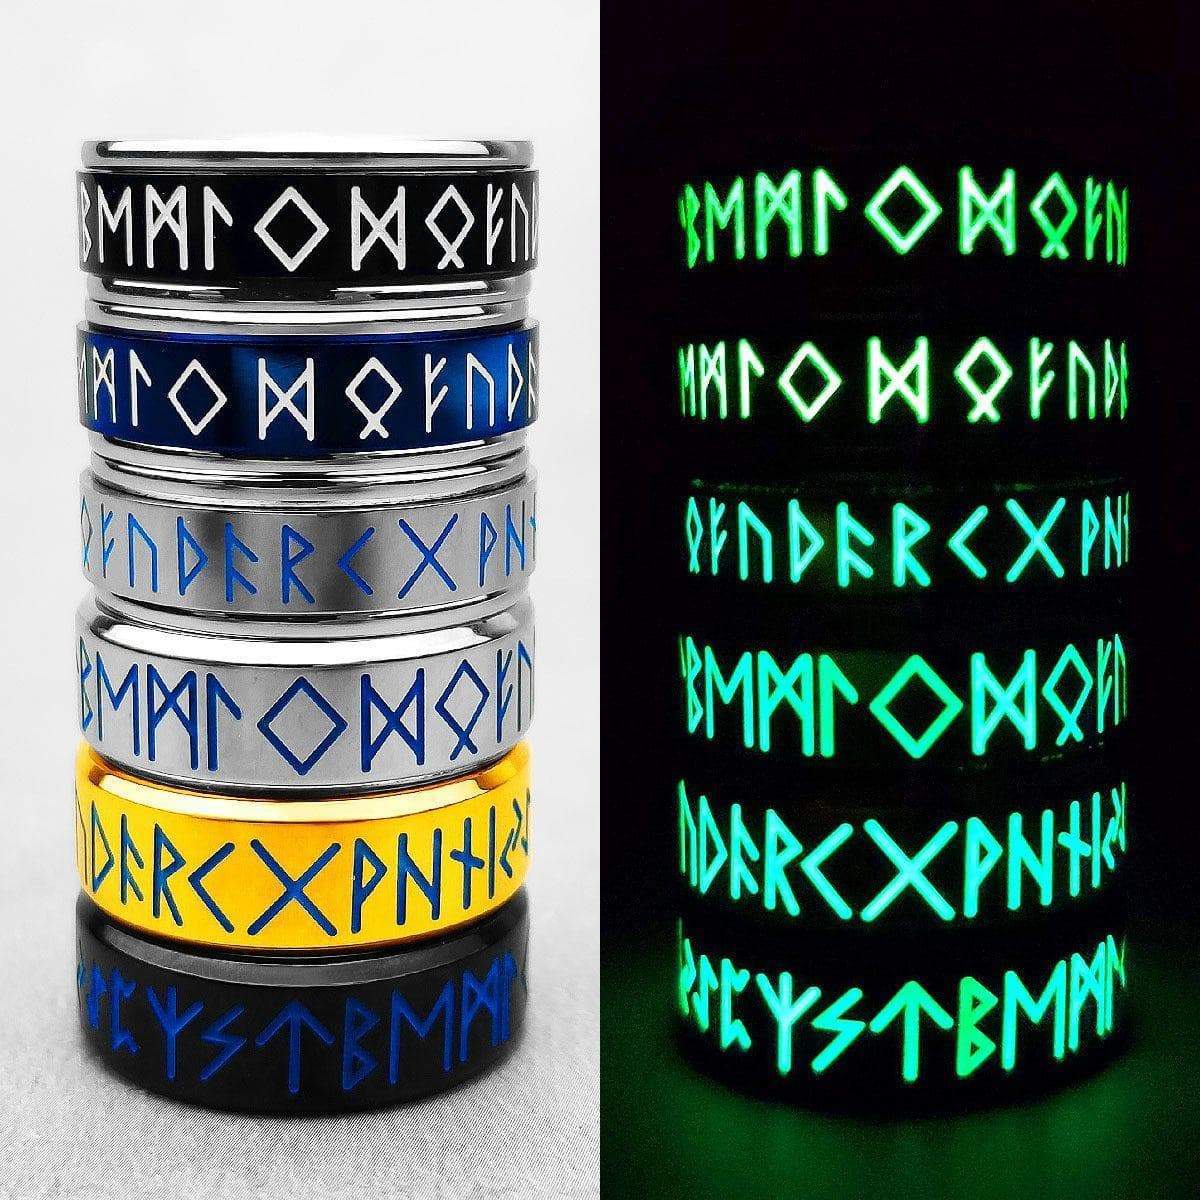 Rings Viking Nordic Runic Glowing Stainless Steel Ring Ancient Treasures Ancientreasures Viking Odin Thor Mjolnir Celtic Ancient Egypt Norse Norse Mythology